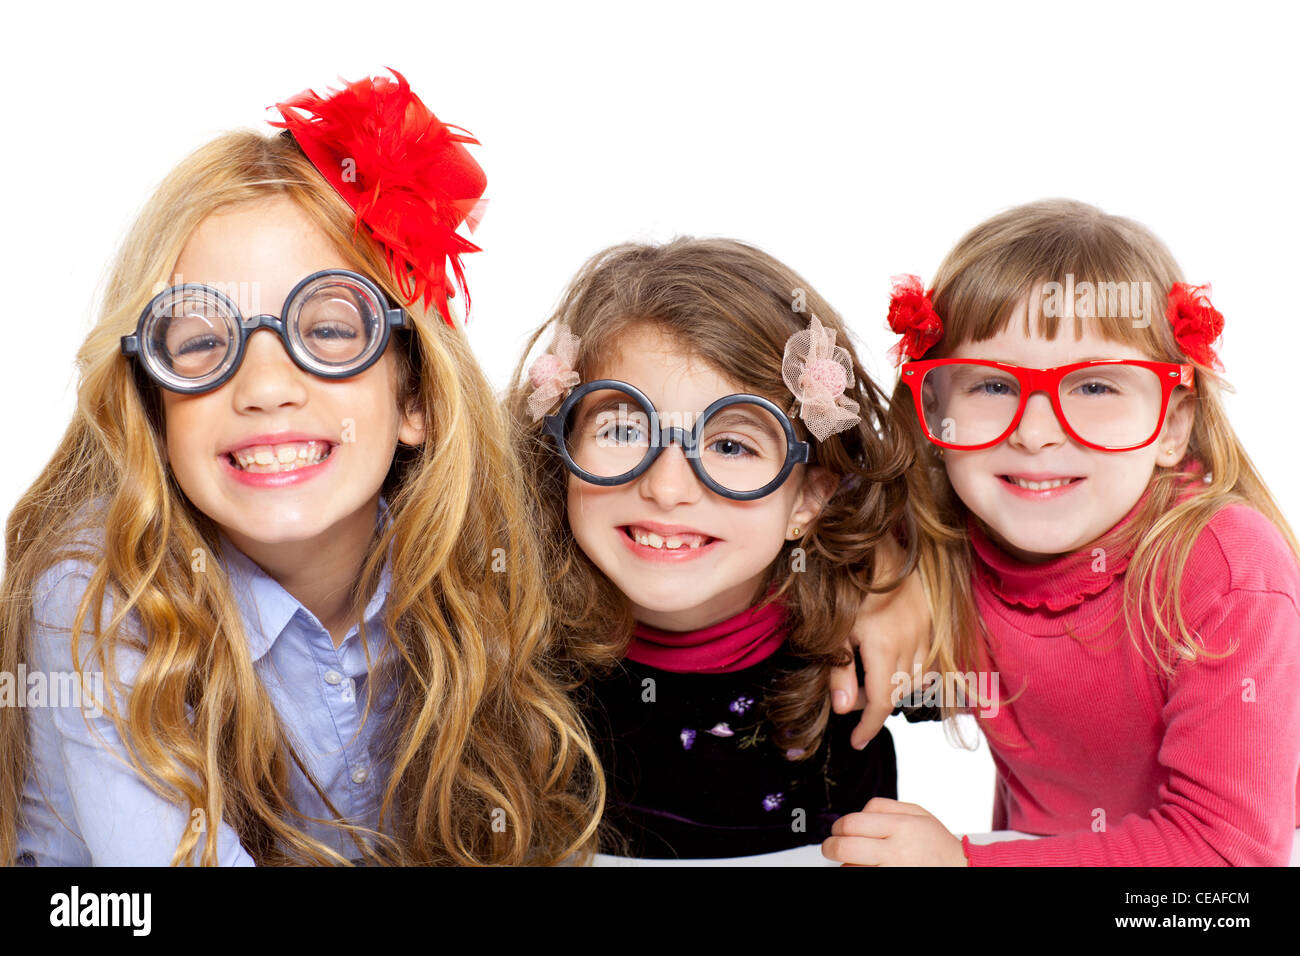 nerd children girl group with glasses and funny expression Stock Photo